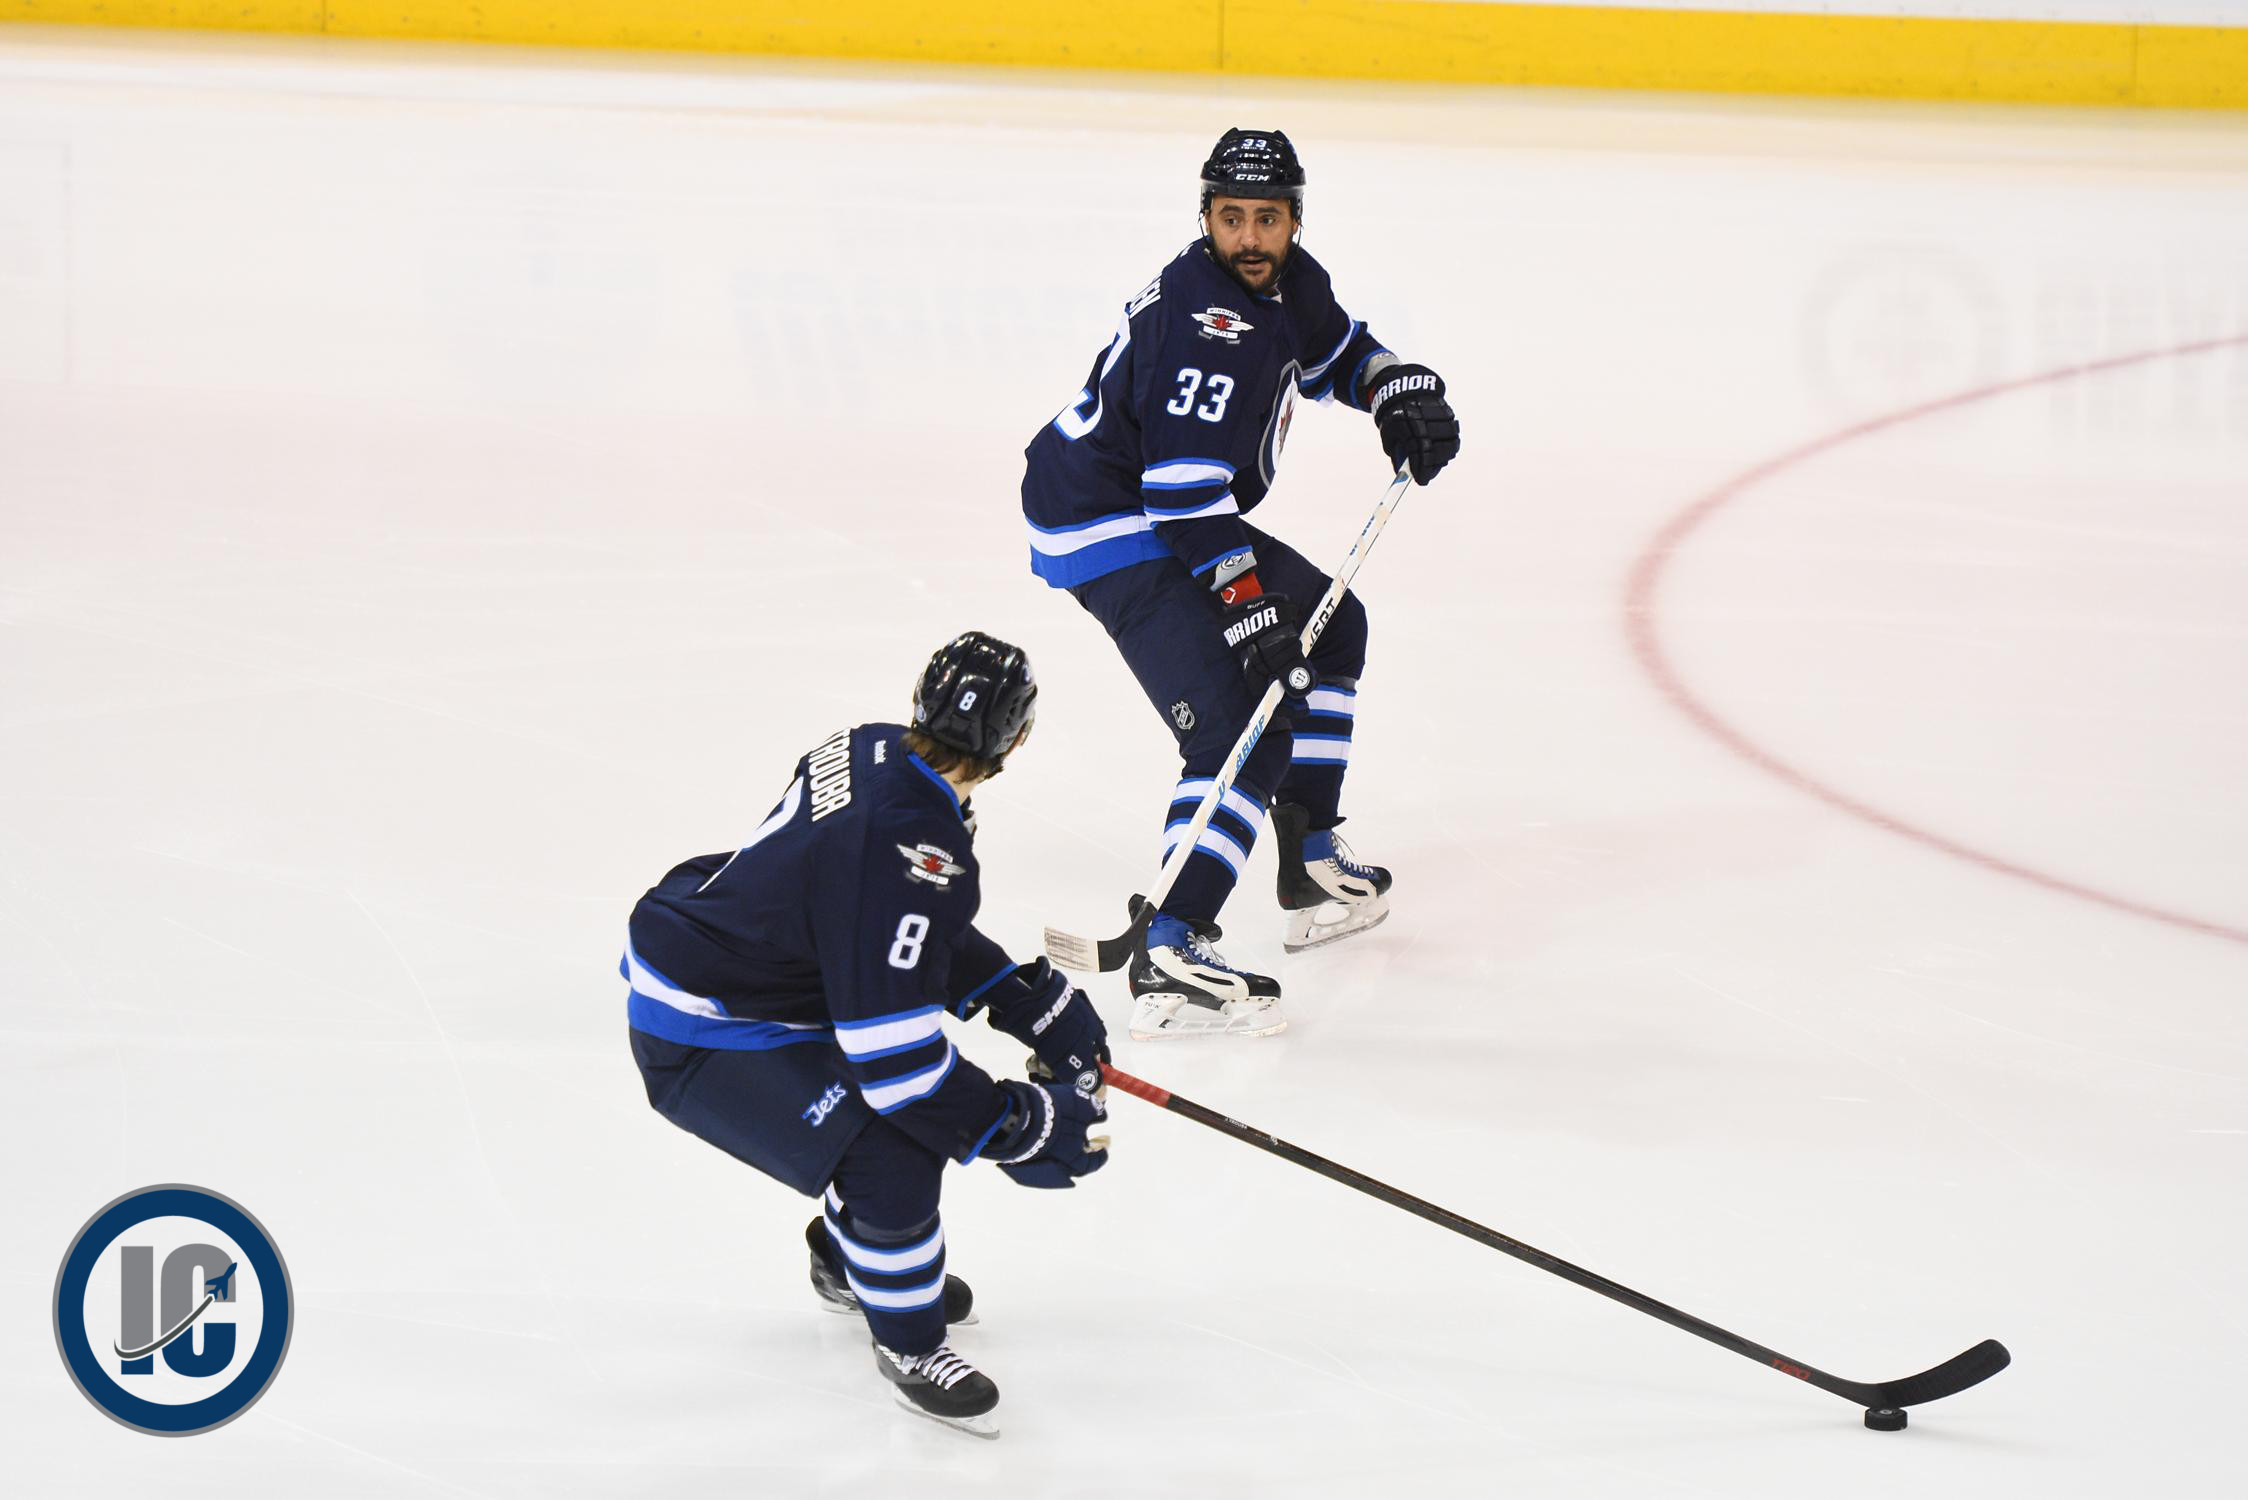 Trouba and Byfuglien pairing